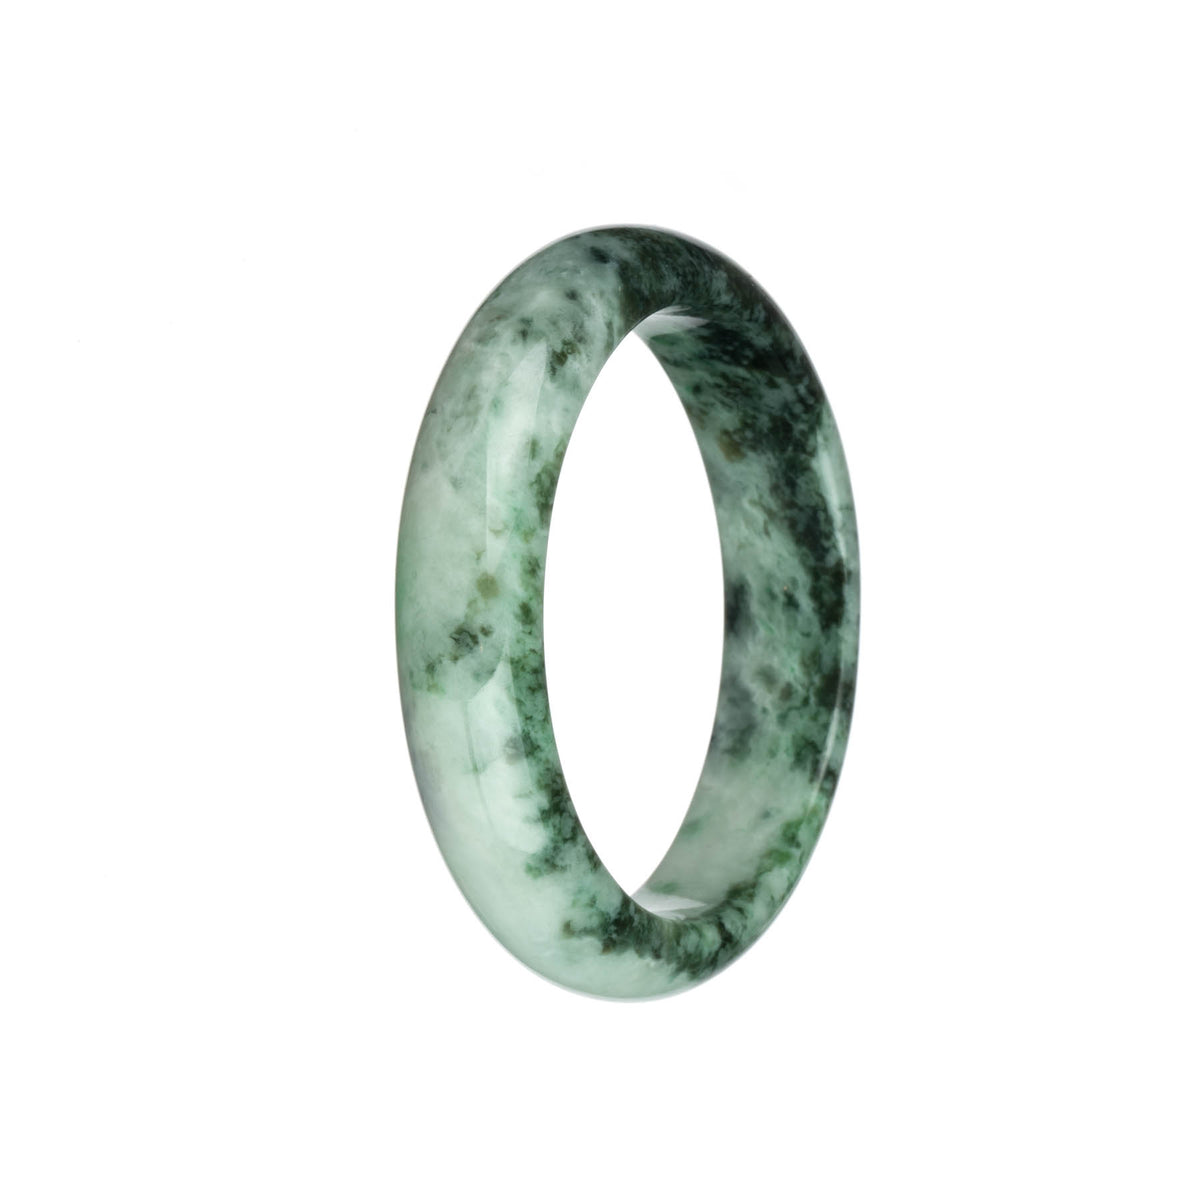 Authentic Grade A Dark Green and Green Patterns with White and Apple Green Spots Traditional Jade Bangle Bracelet - 58mm Half Moon